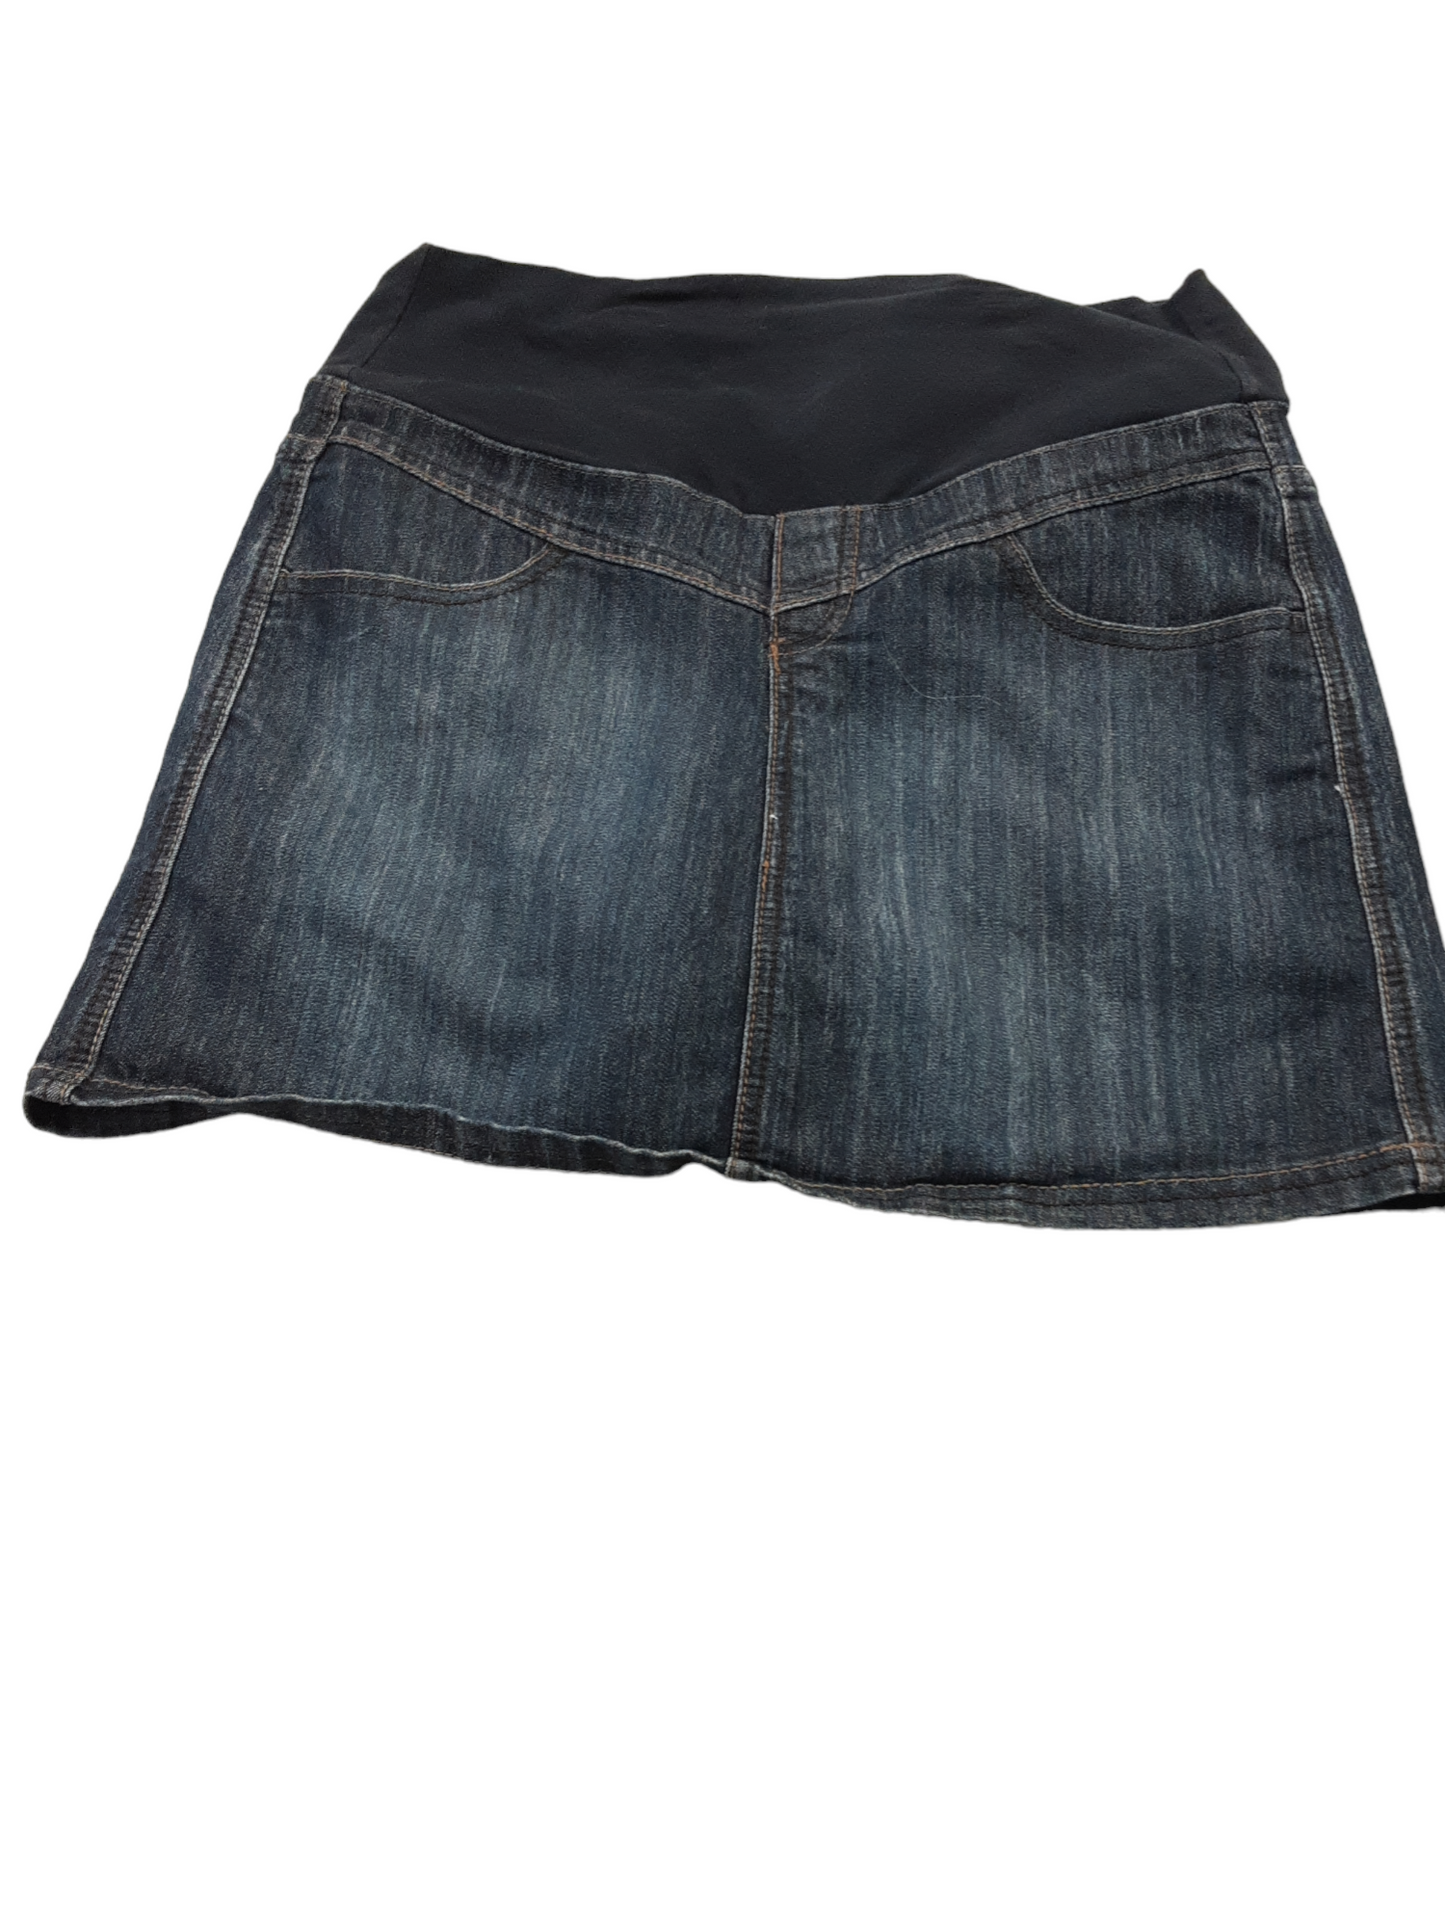 Skirt with built-in shorts size medium